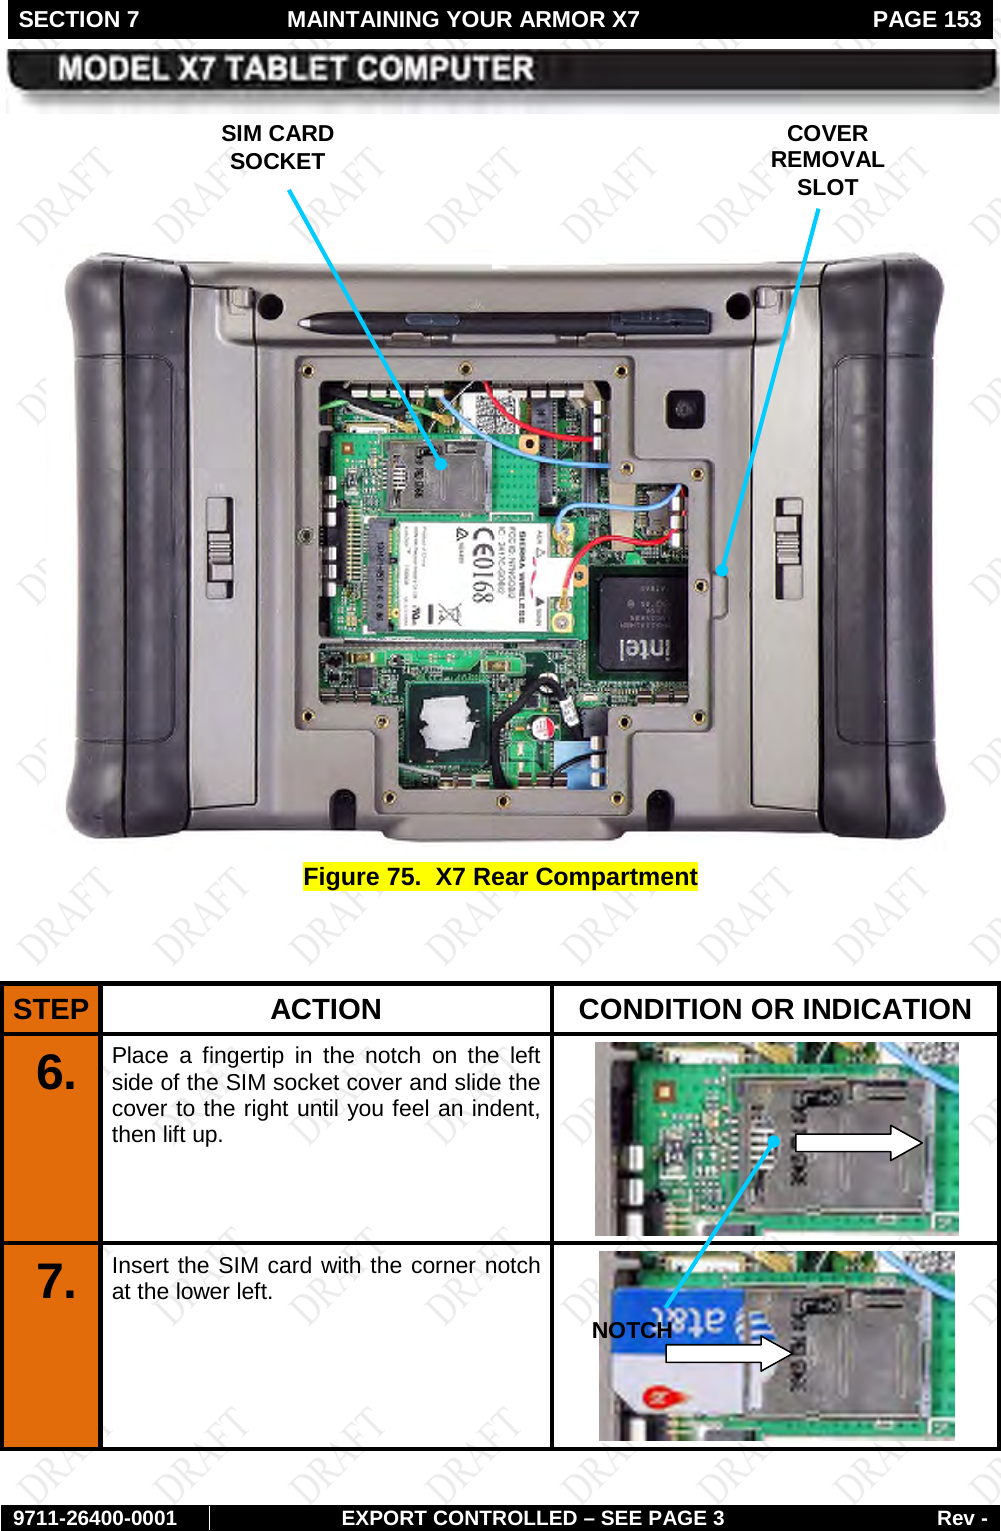 SECTION 7  MAINTAINING YOUR ARMOR X7  PAGE 153        9711-26400-0001 EXPORT CONTROLLED – SEE PAGE 3 Rev -     Figure 75.  X7 Rear Compartment   STEP  ACTION CONDITION OR INDICATION 6.  Place a fingertip in the notch on the left side of the SIM socket cover and slide the cover to the right until you feel an indent, then lift up.  7.  Insert the SIM card with the corner notch at the lower left.  SIM CARD SOCKET COVER REMOVAL SLOT NOTCH 